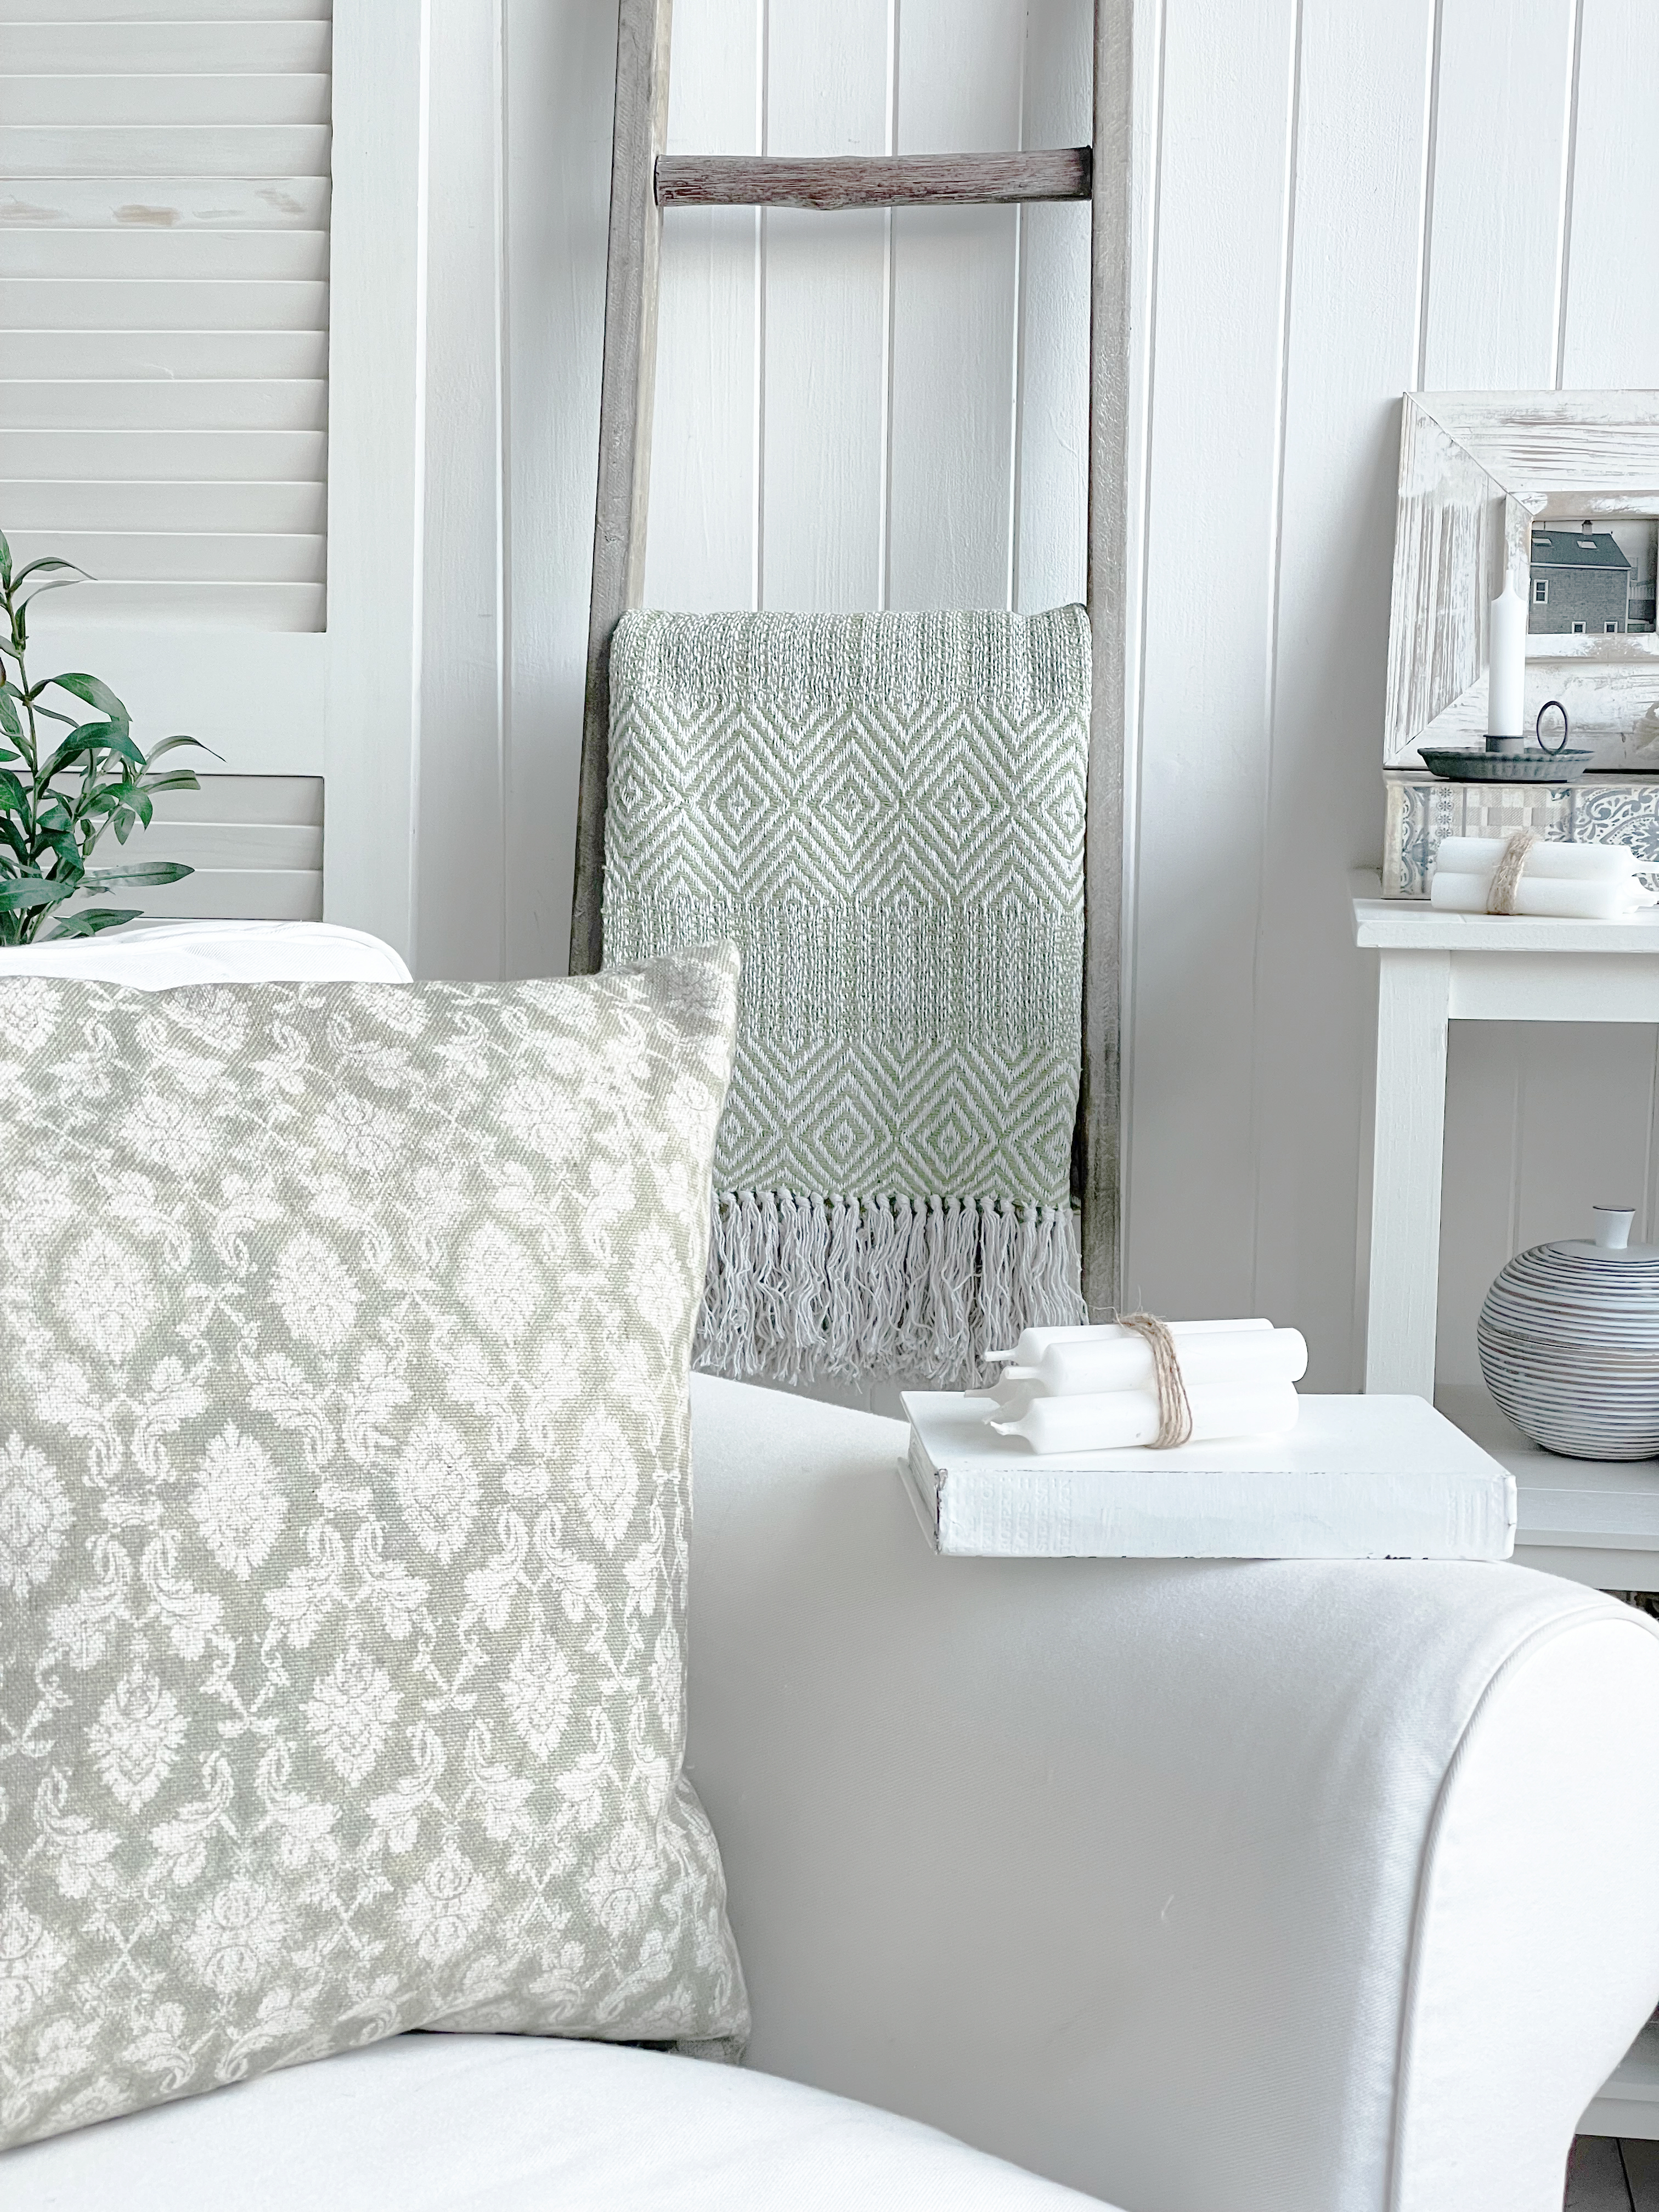 New England Style White Furniture and accessories for the home. Coastal, country and modern farmhouse interiors and furniture. Greenwood Throw